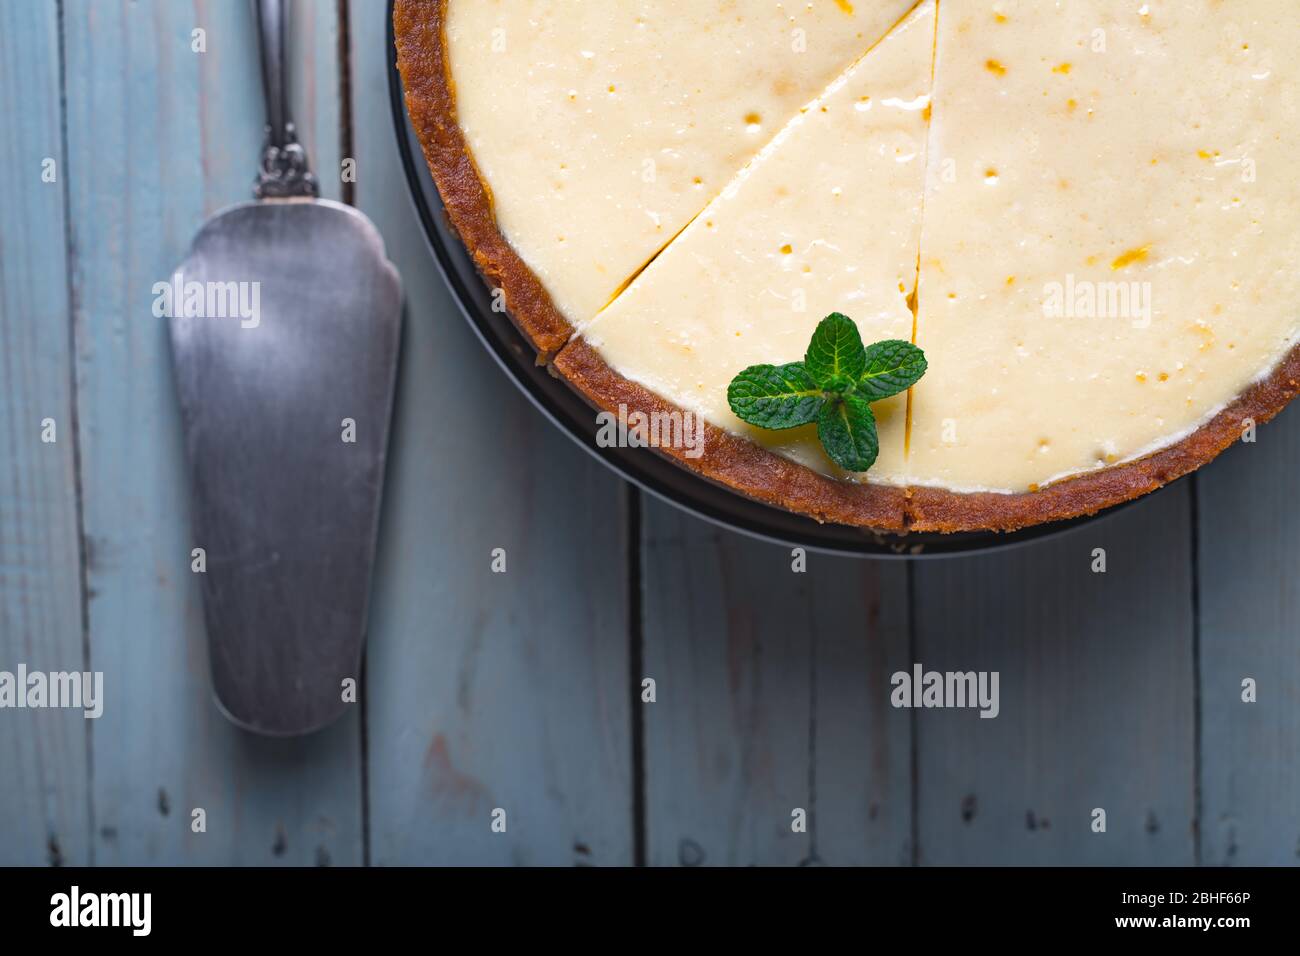 Plane round classic New York cheesecake and his slice with sprig of mint on a plate on a wooden table. The concept of bakery and sweet cakes desserts Stock Photo